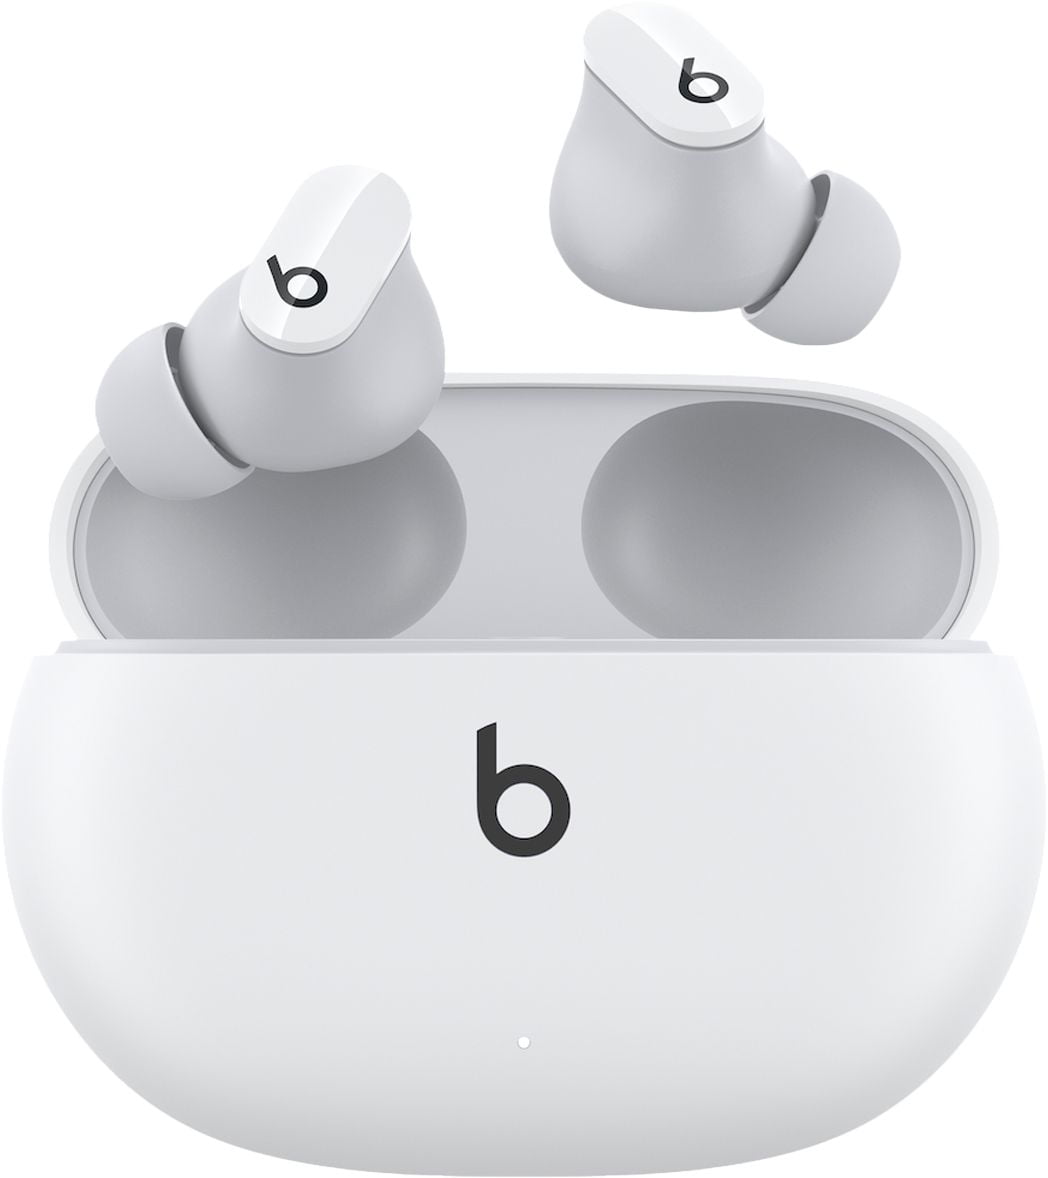 First Impressions of the Beats Studio Buds +: Don't Believe the Hype